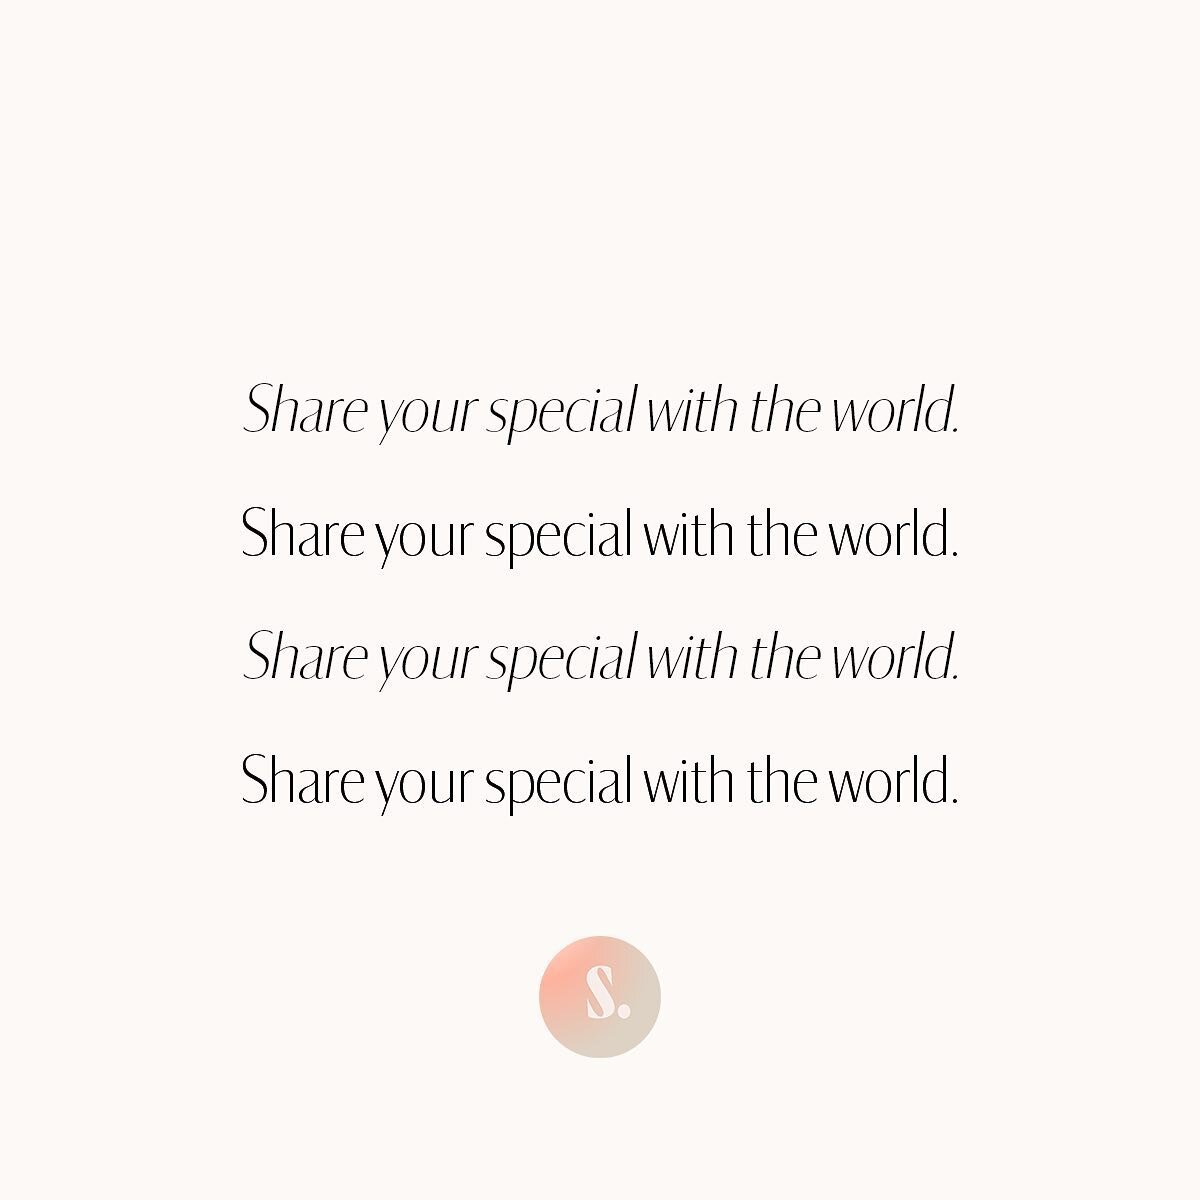 Someone recently reminded me what I told them a few years ago that changed their life. She said, you told me to &ldquo;share your special with the world, we need it&rdquo;! I never forgot it and I feel like you need to hear it now.

I was surprised, 